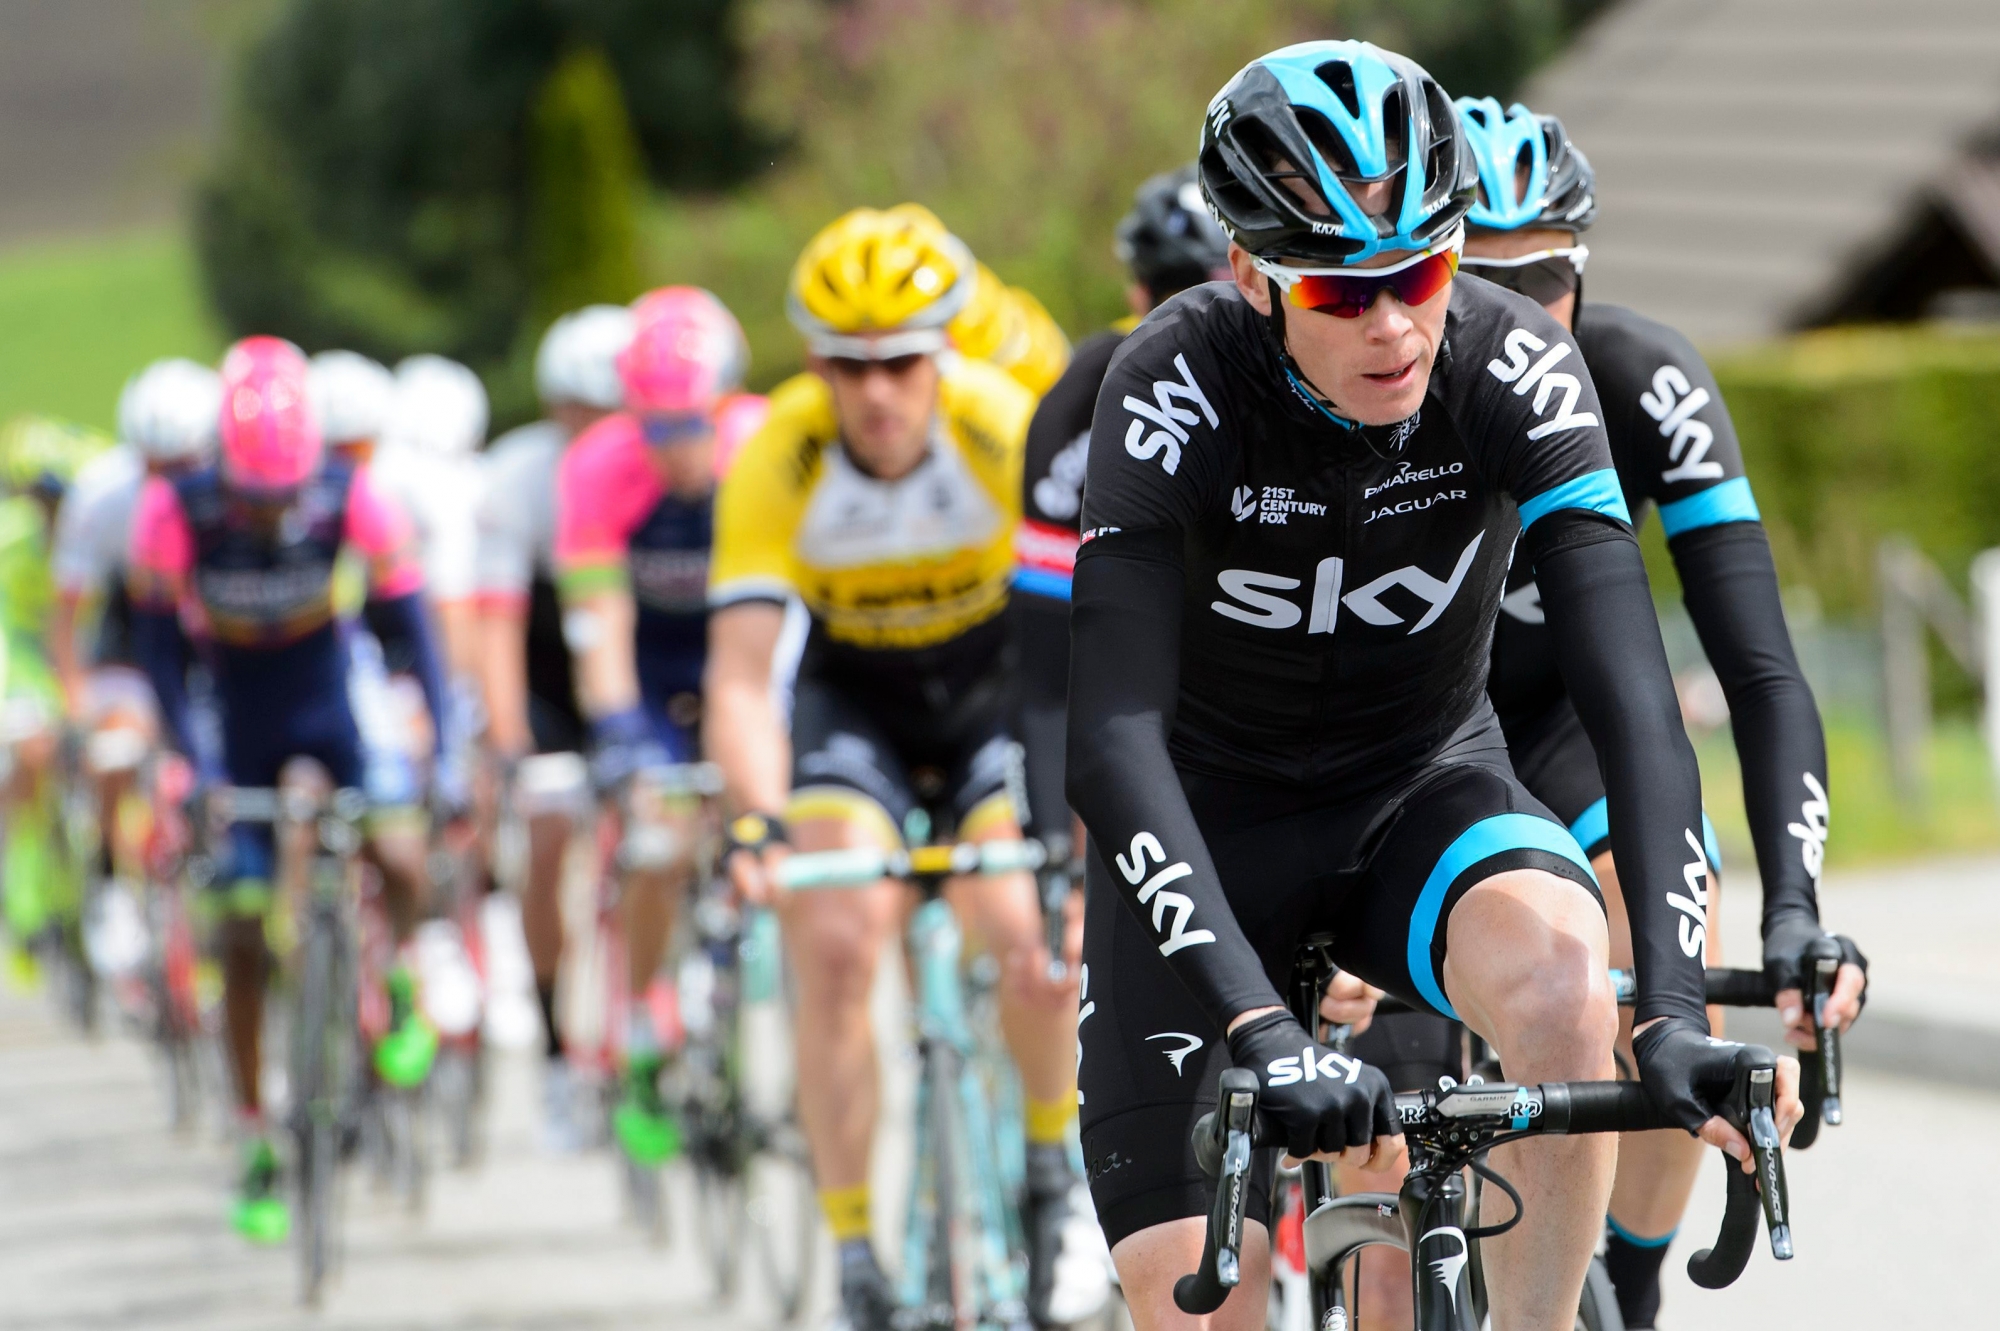 British Christopher Froome of team Sky Procycling, front, rides with the pack during the third stage, a 172,5 km race between Moutier and Porrentruy at the 69th Tour de Romandie UCI ProTour cycling race, in Develier, Switzerland, Thursday, April 30, 2015. (KEYSTONE/Jean-Christophe Bott) SWITZERLAND CYCLING TOUR DE ROMANDIE 2015